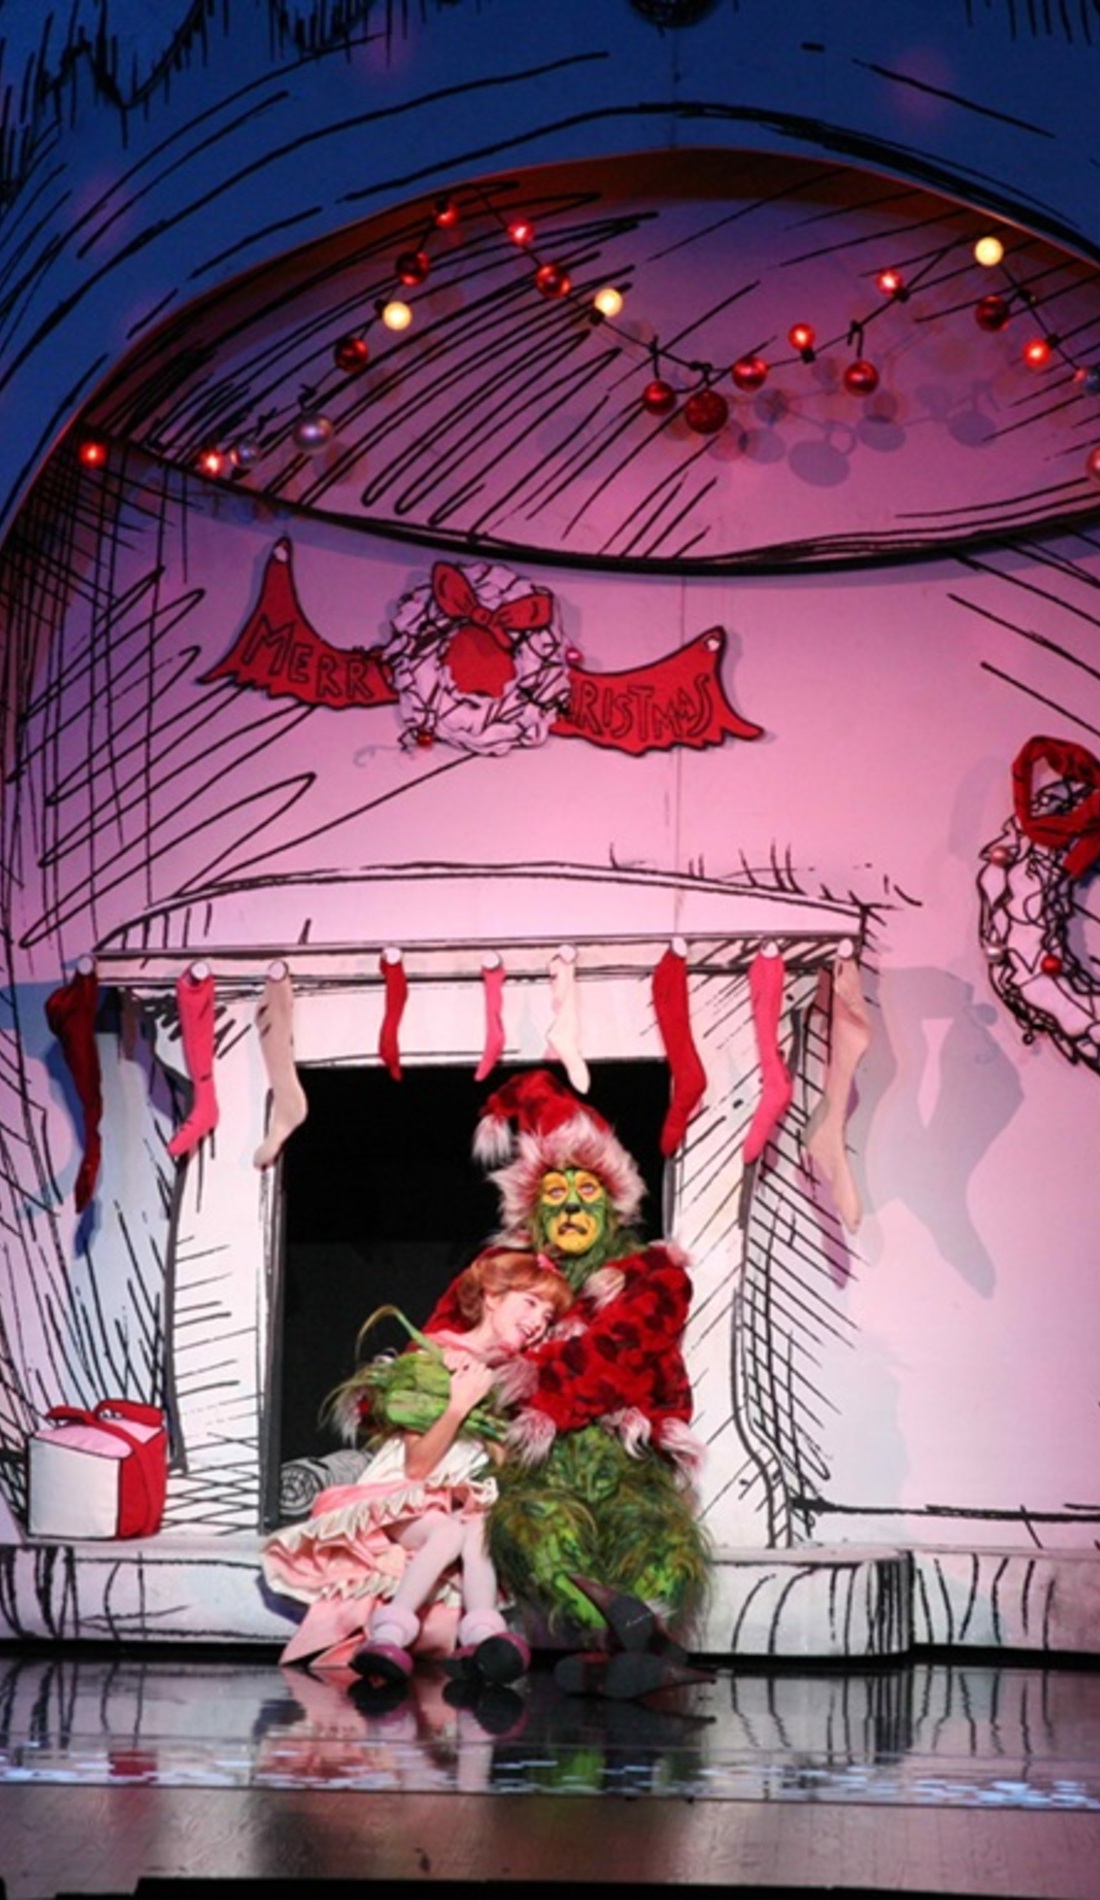 How The Grinch Stole Christmas in San Diego SeatGeek